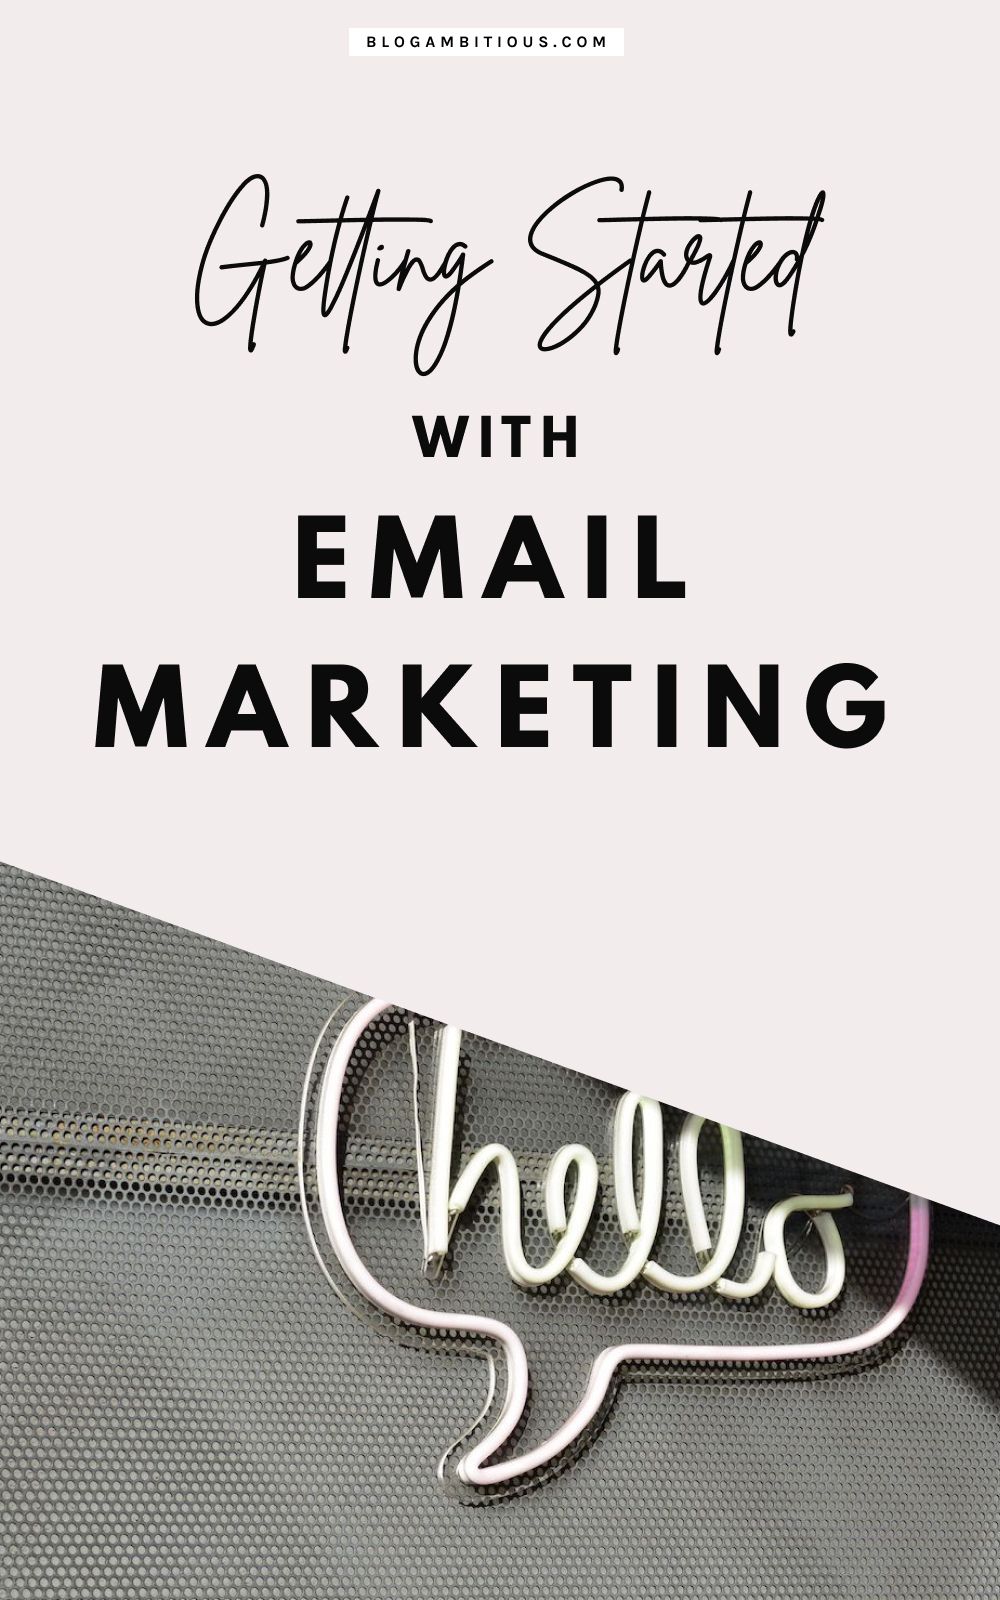 Start Email Marketing as a Blogger